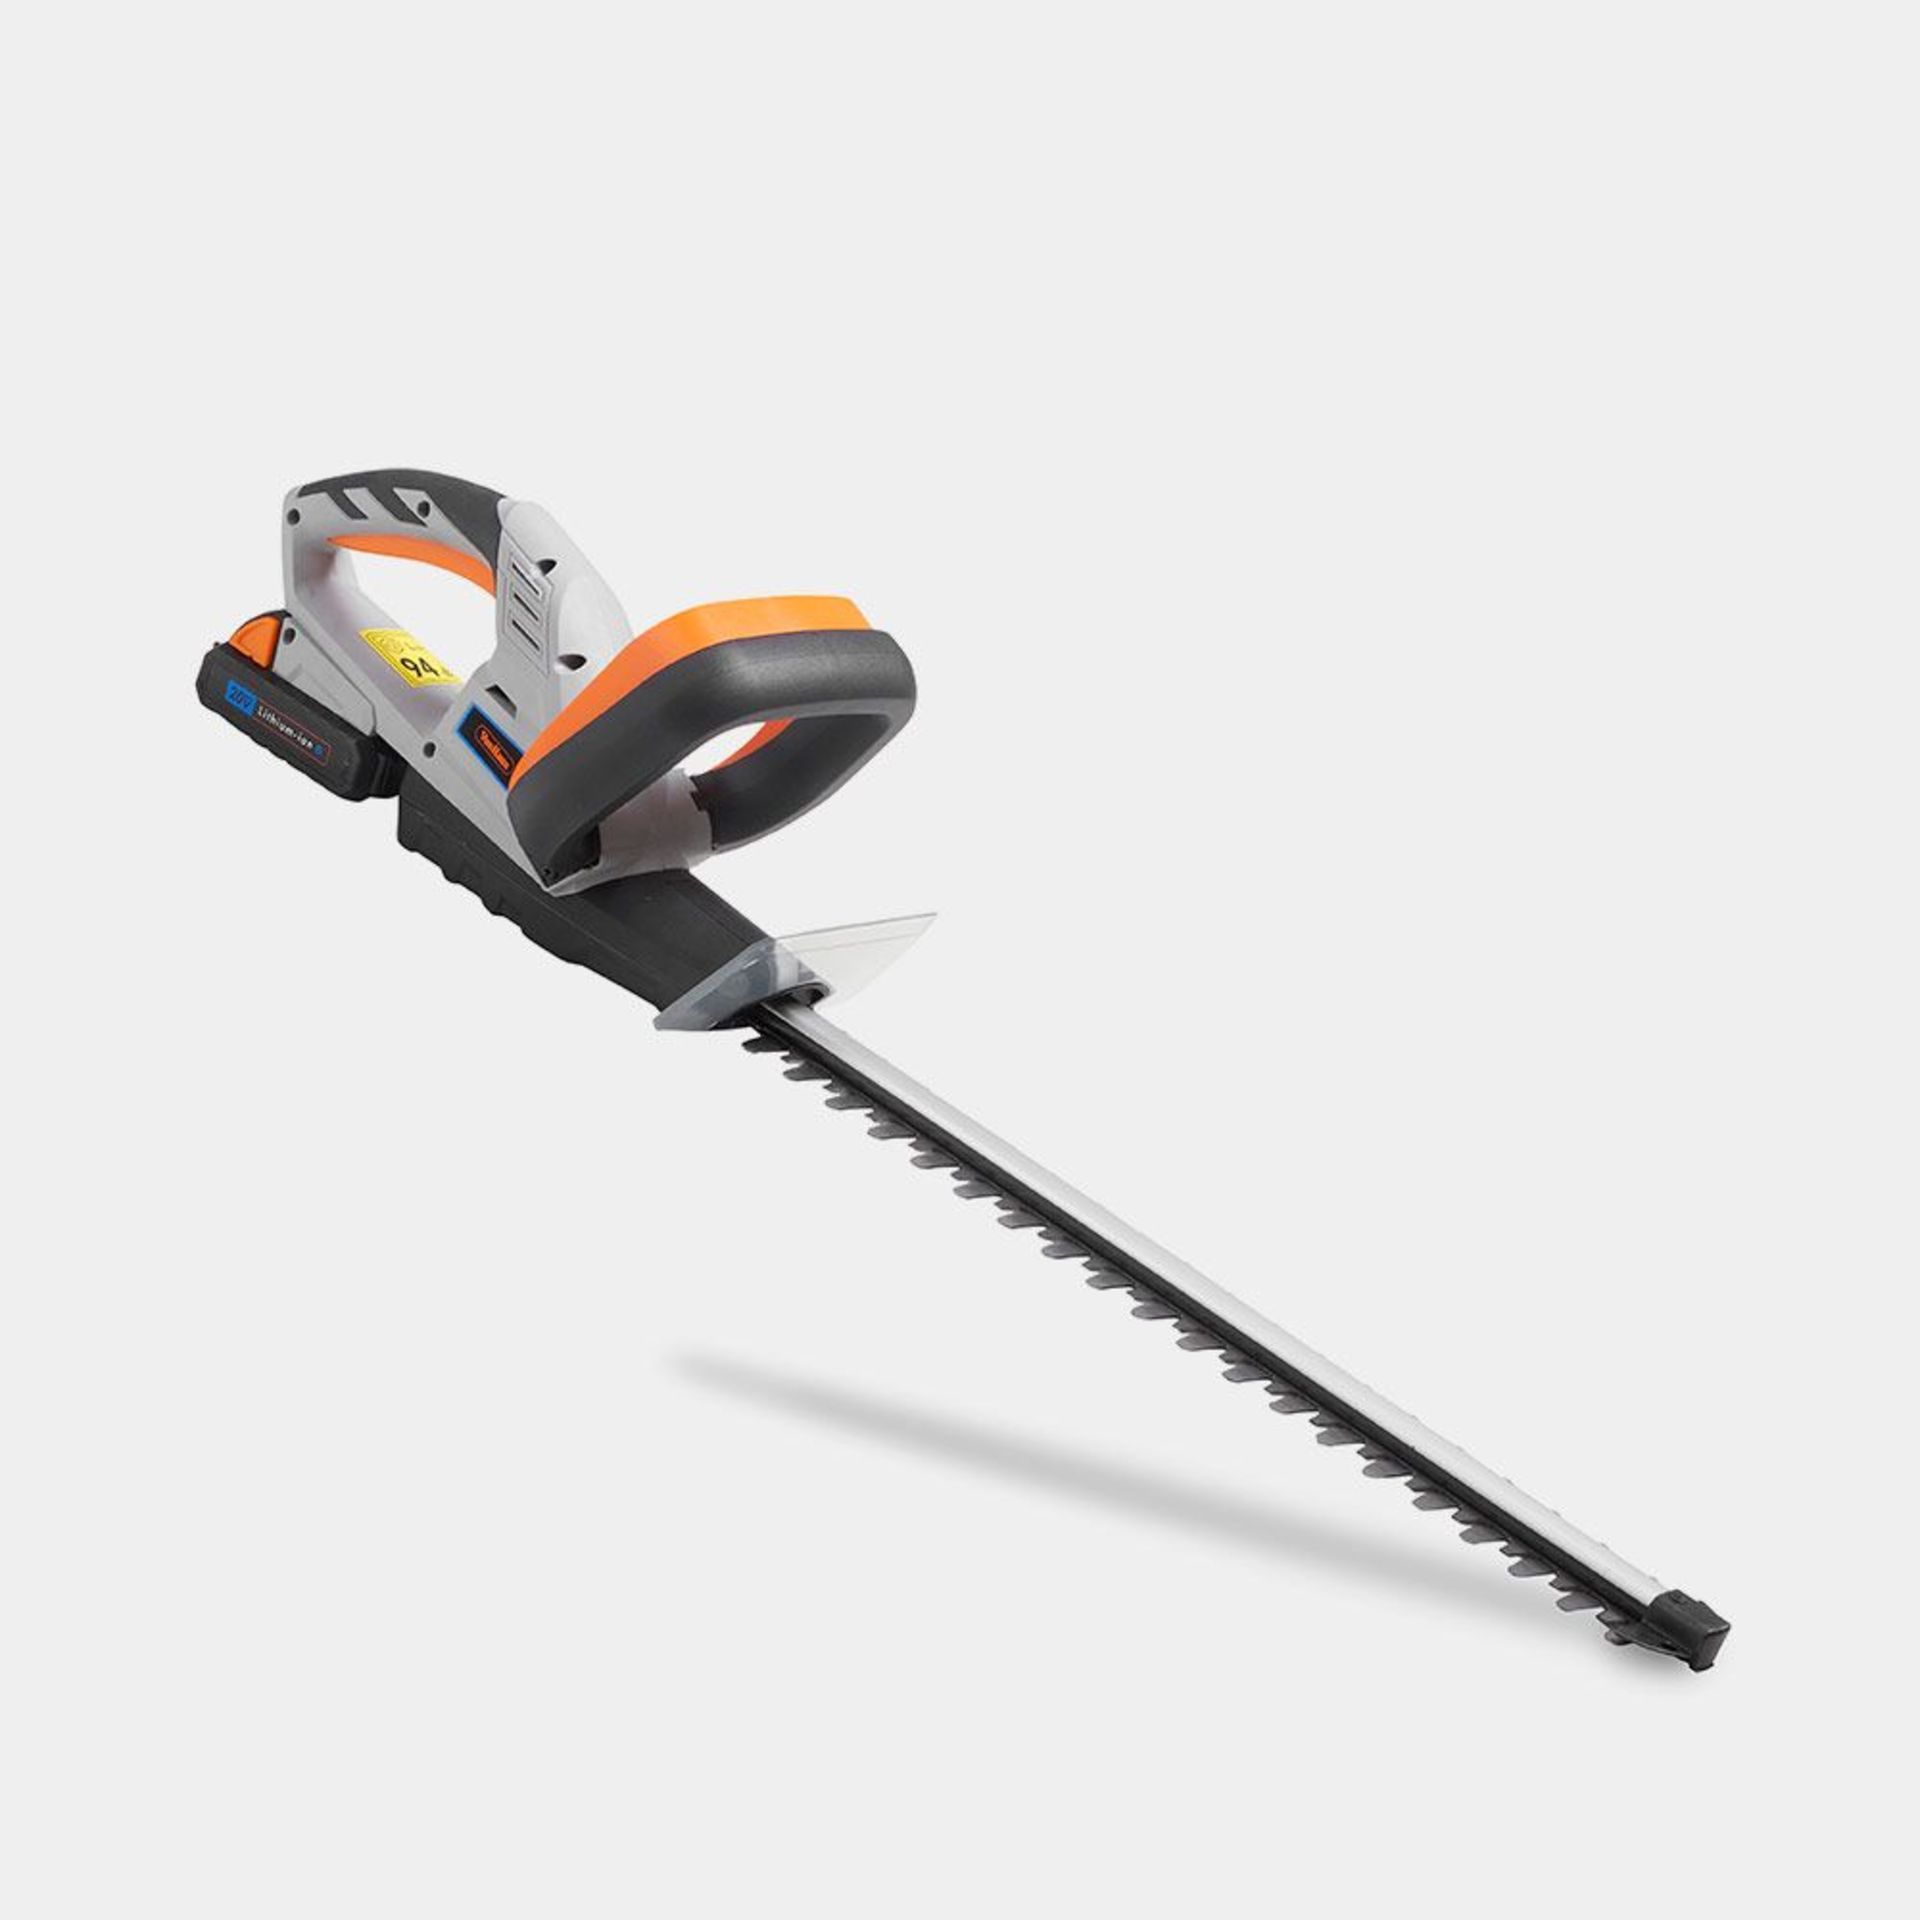 G-series Cordless Hedge Trimmer. - BI. Boasting a fast, 51cm dual-action blade that operates at a